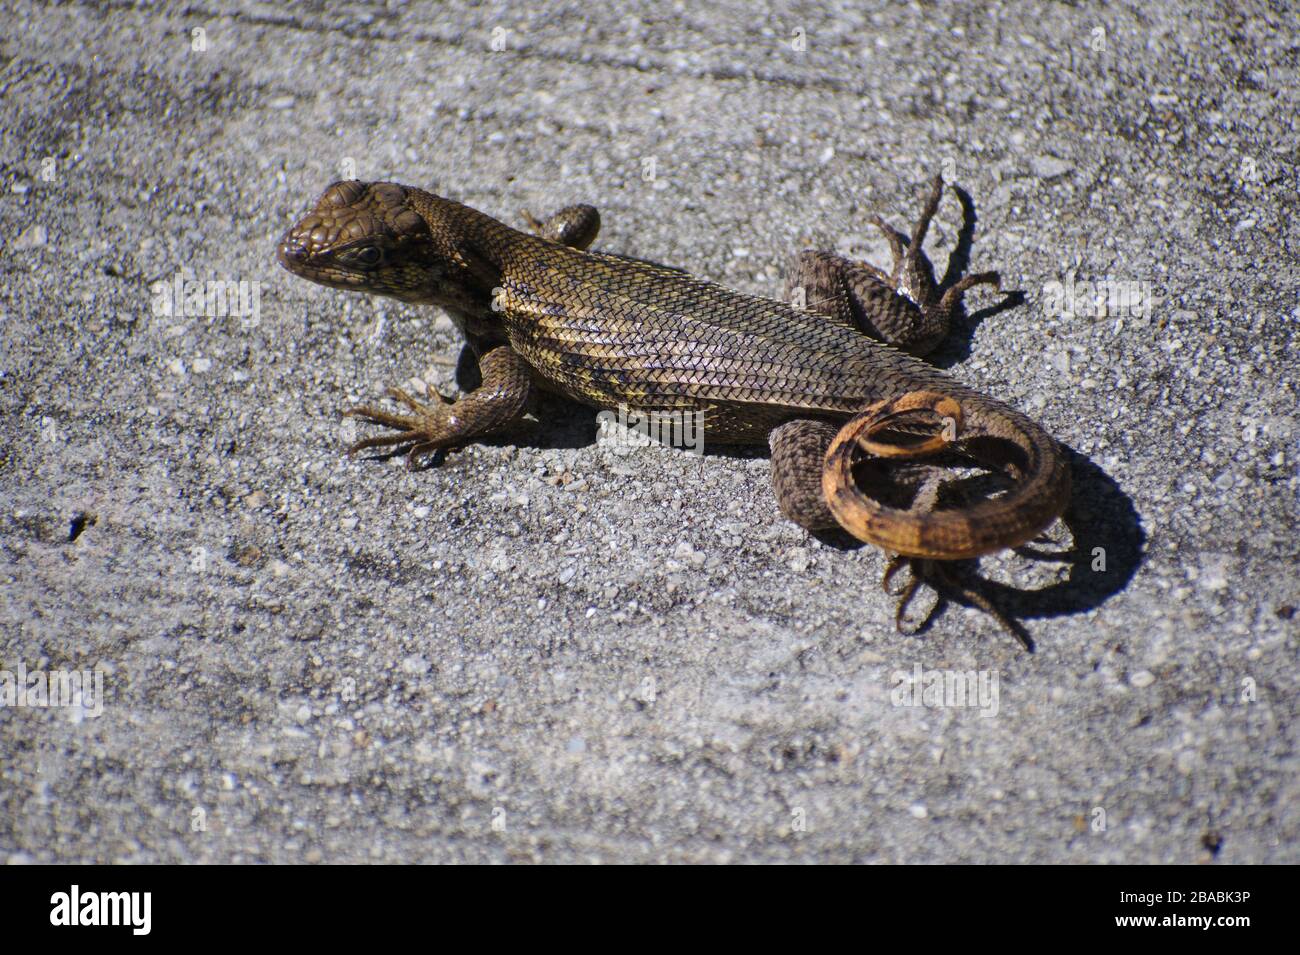 curly-tailed lizard on pavement Stock Photo